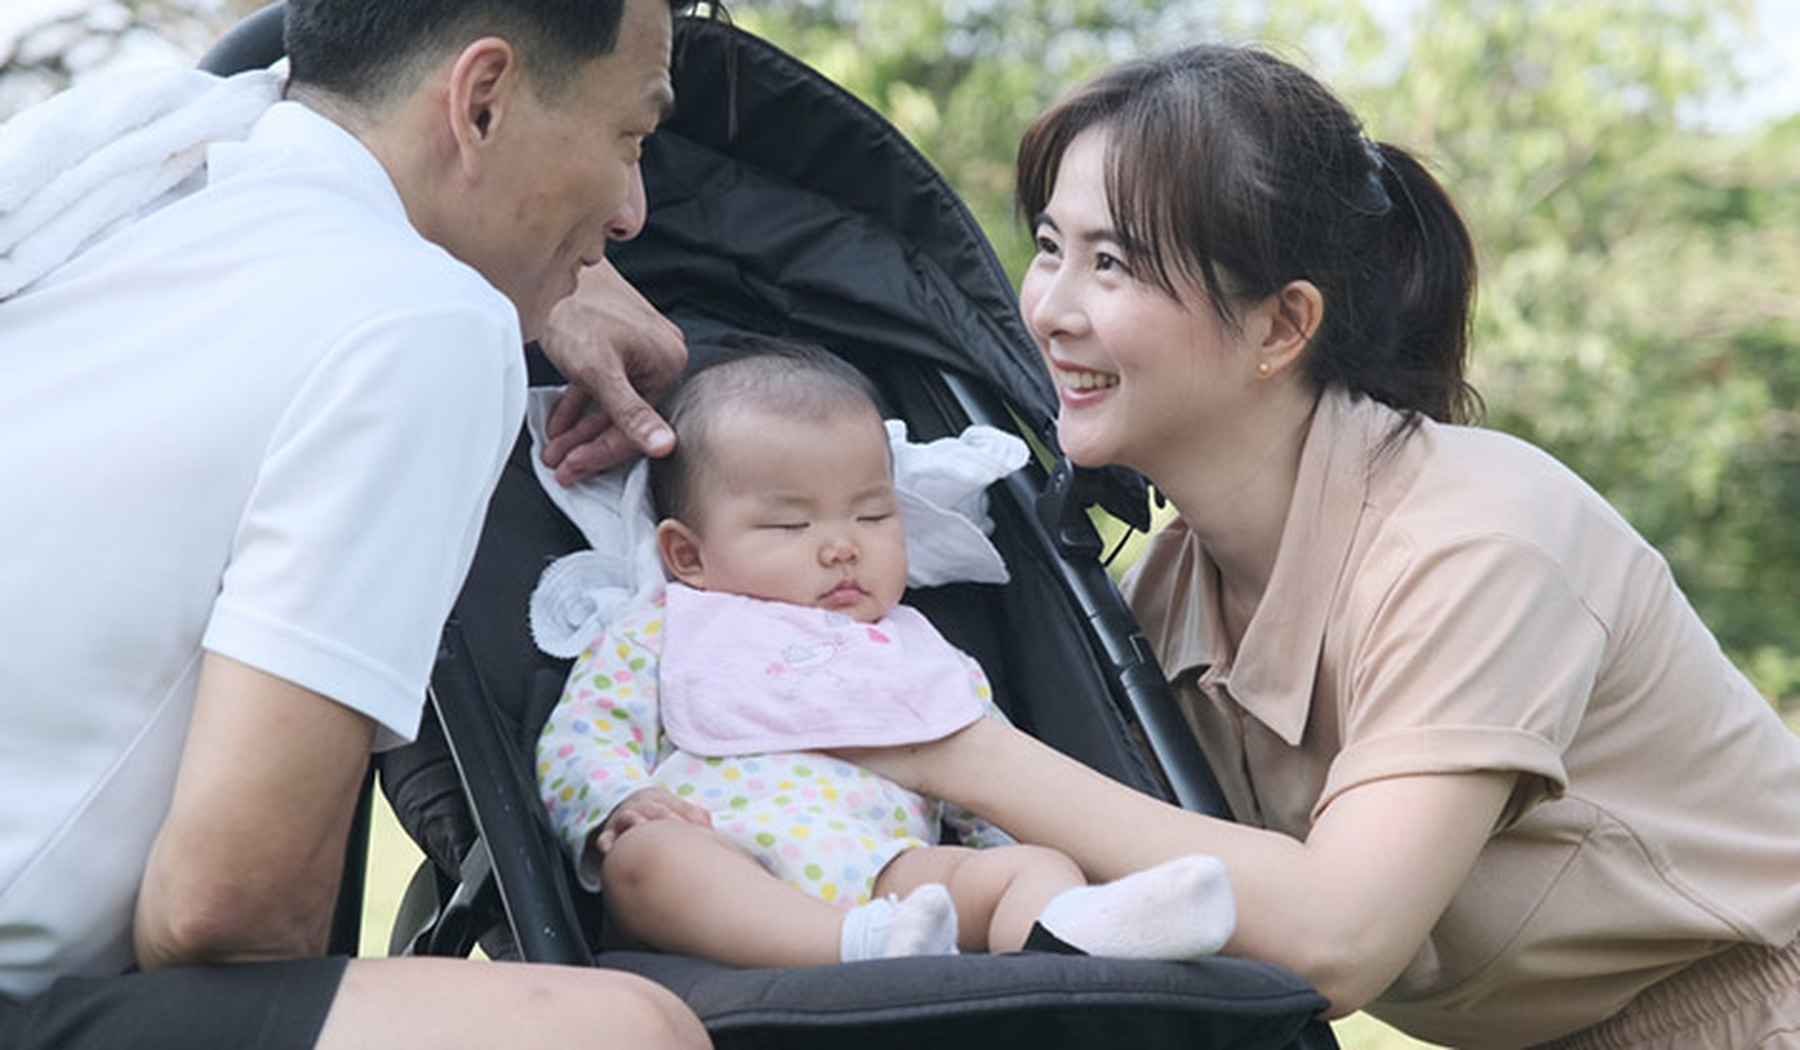 Parents smiling over their baby in a stroller